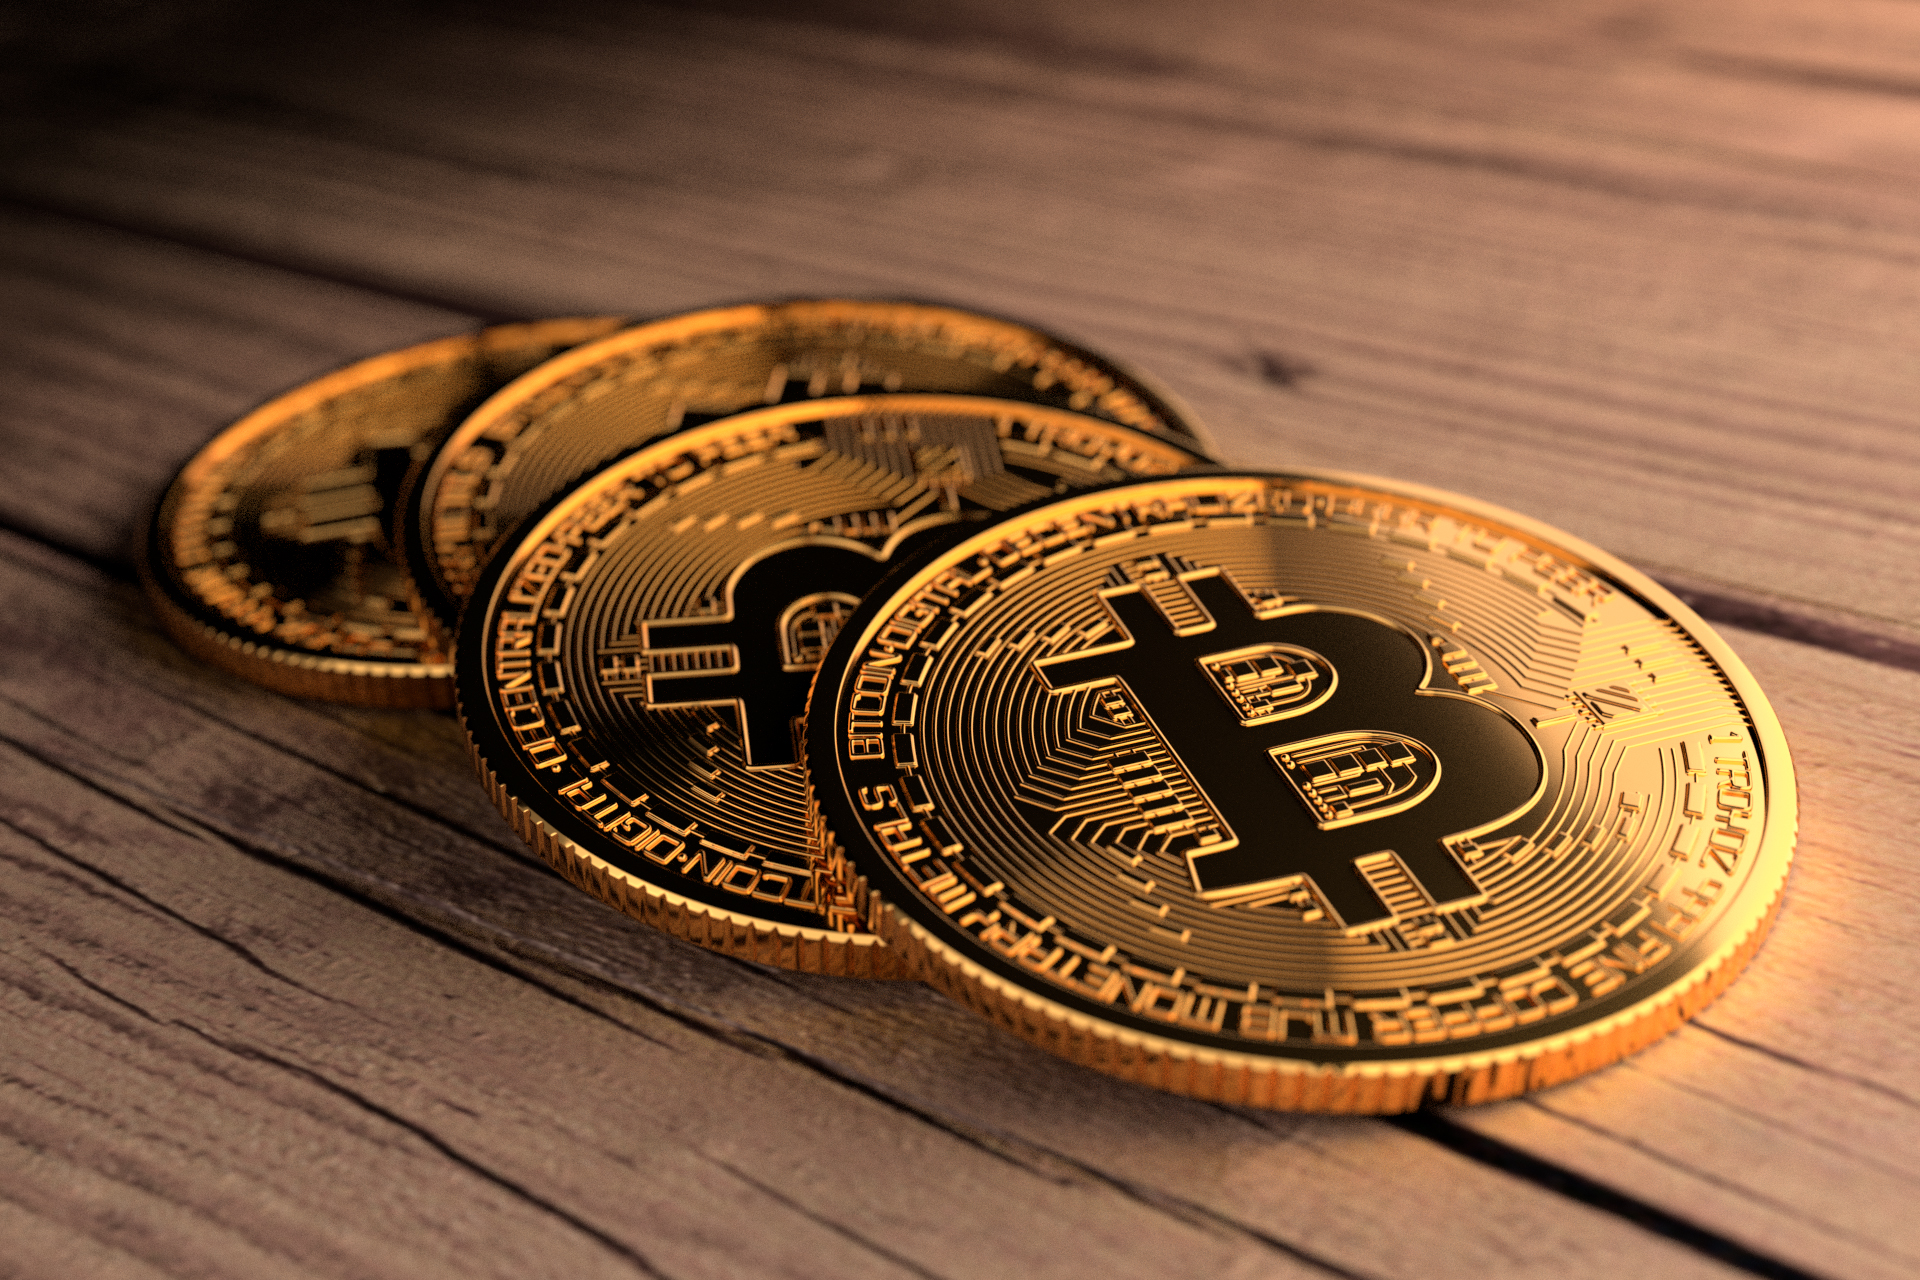 Free Bitcoin Images and Cryptocurrency Concept Photos